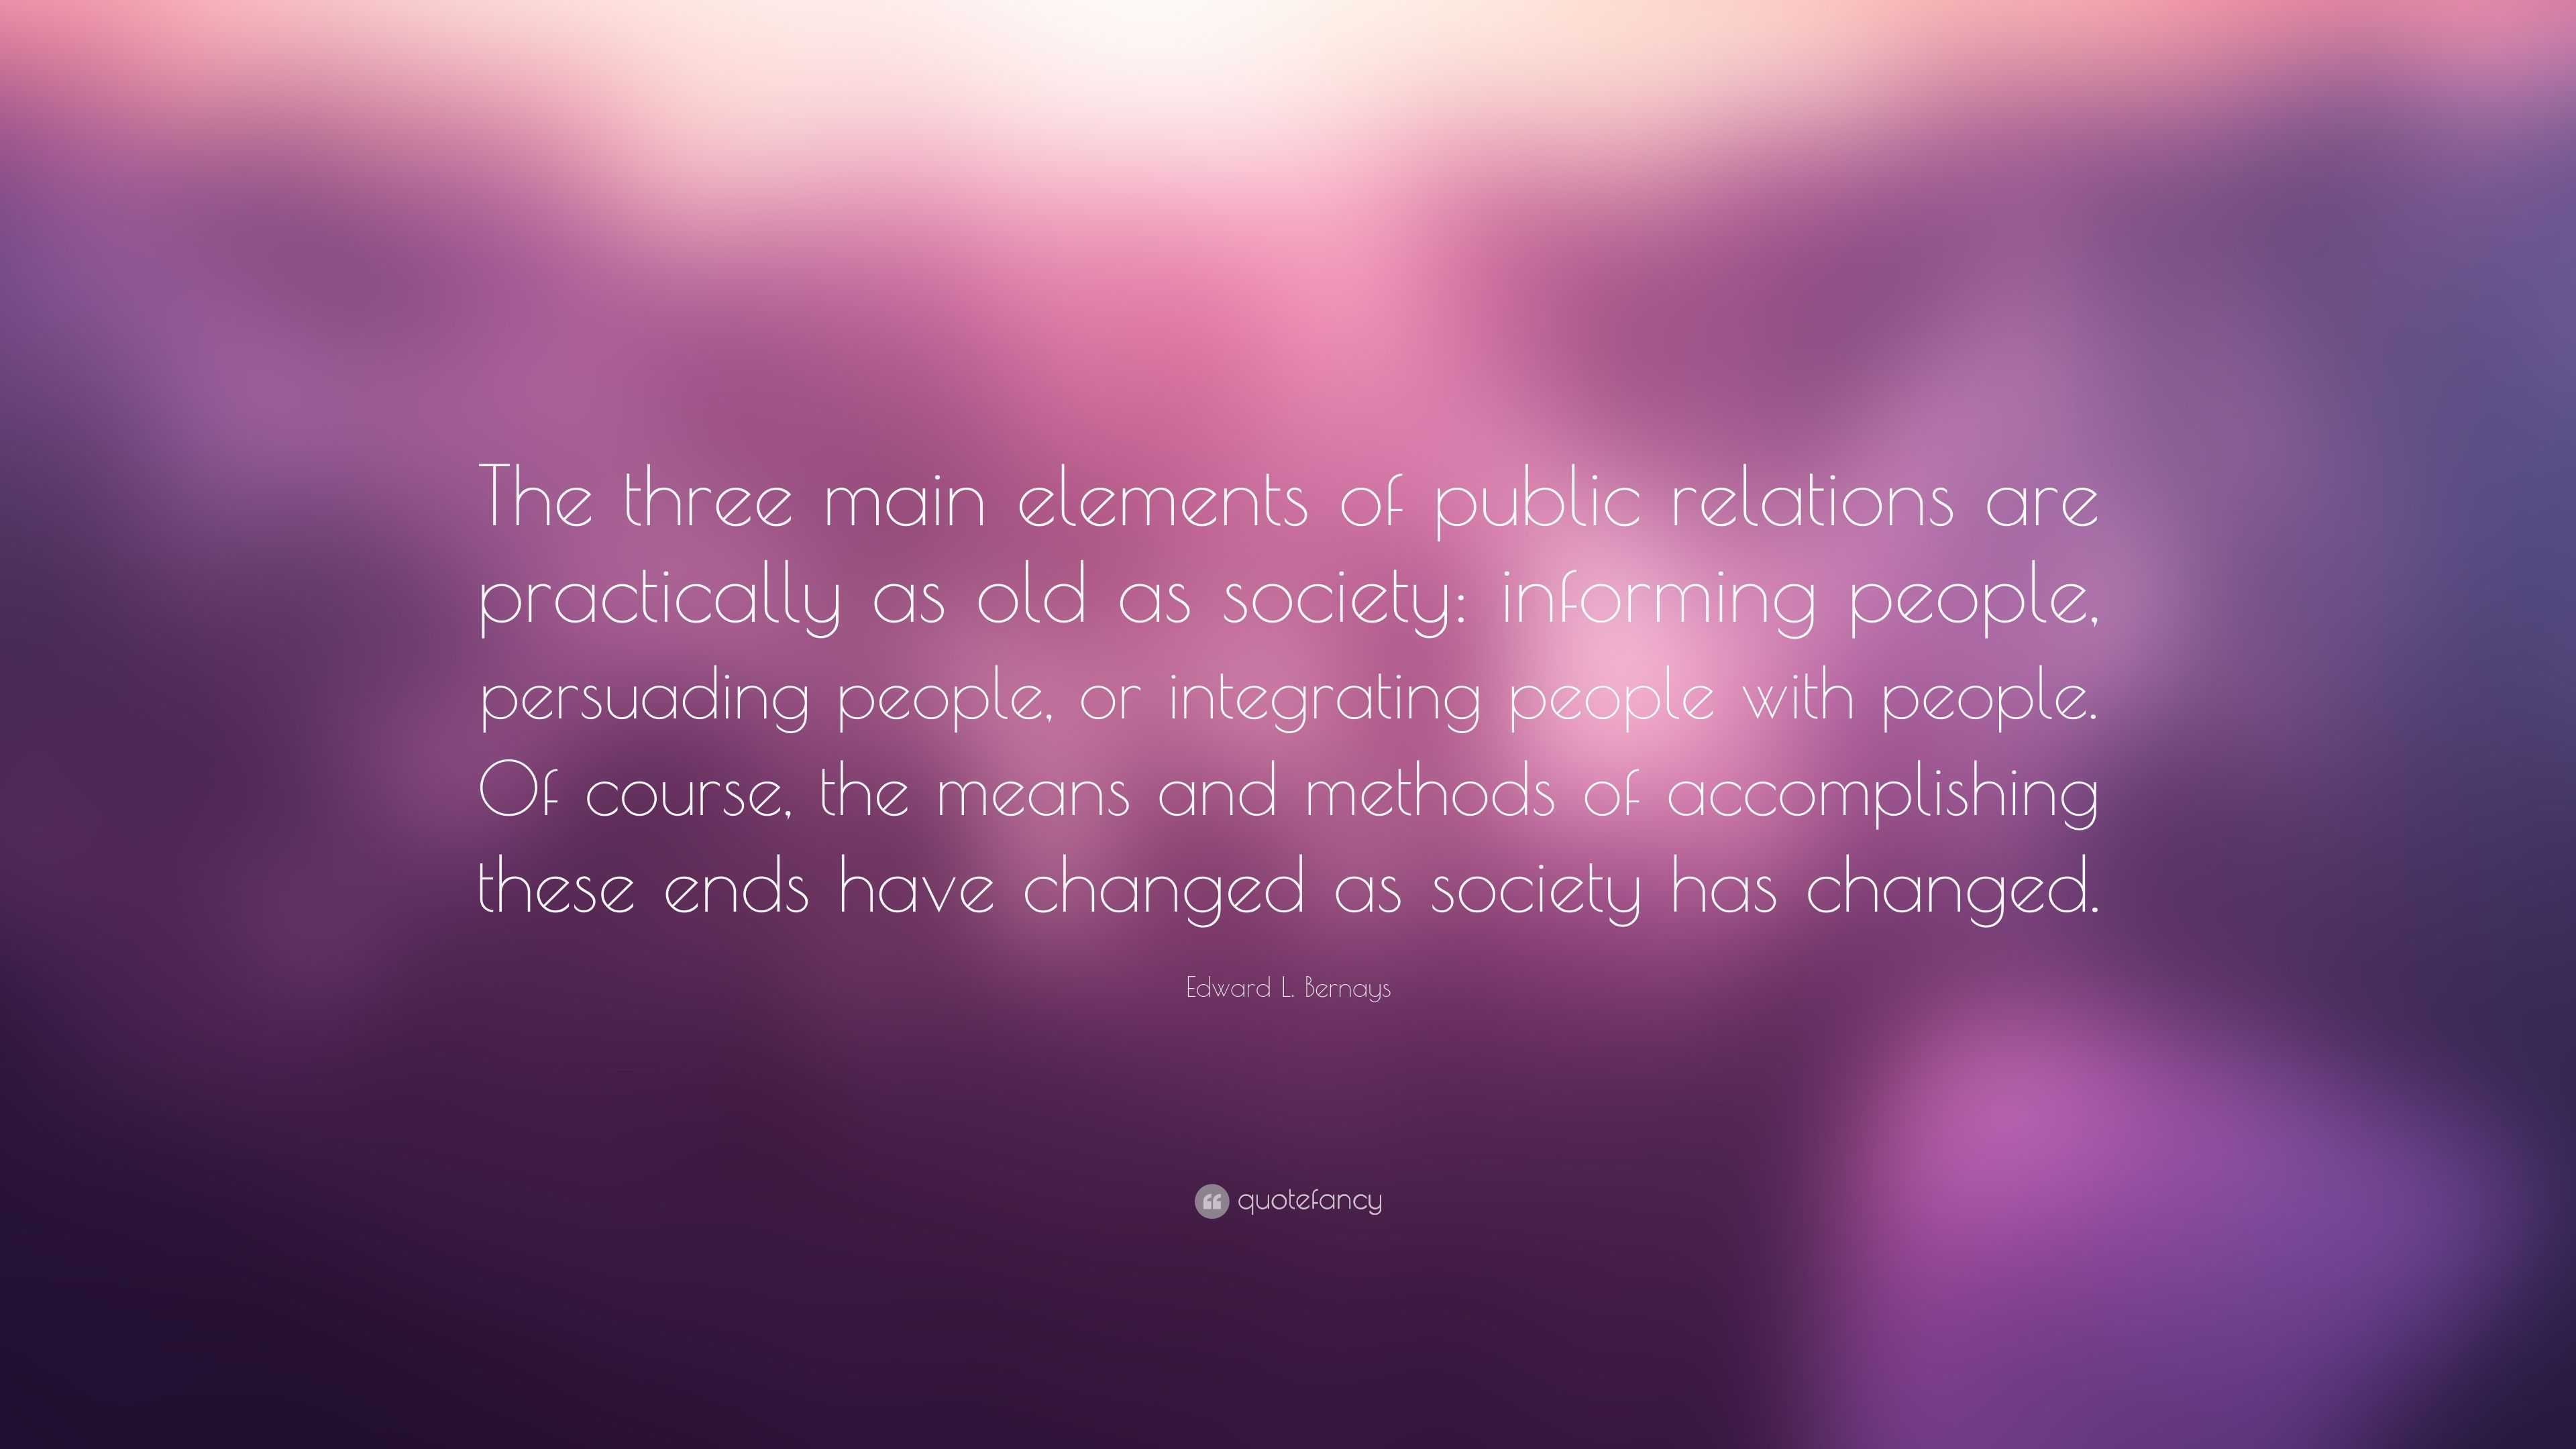 Edward L Bernays Quote “the Three Main Elements Of Public Relations Are Practically As Old As